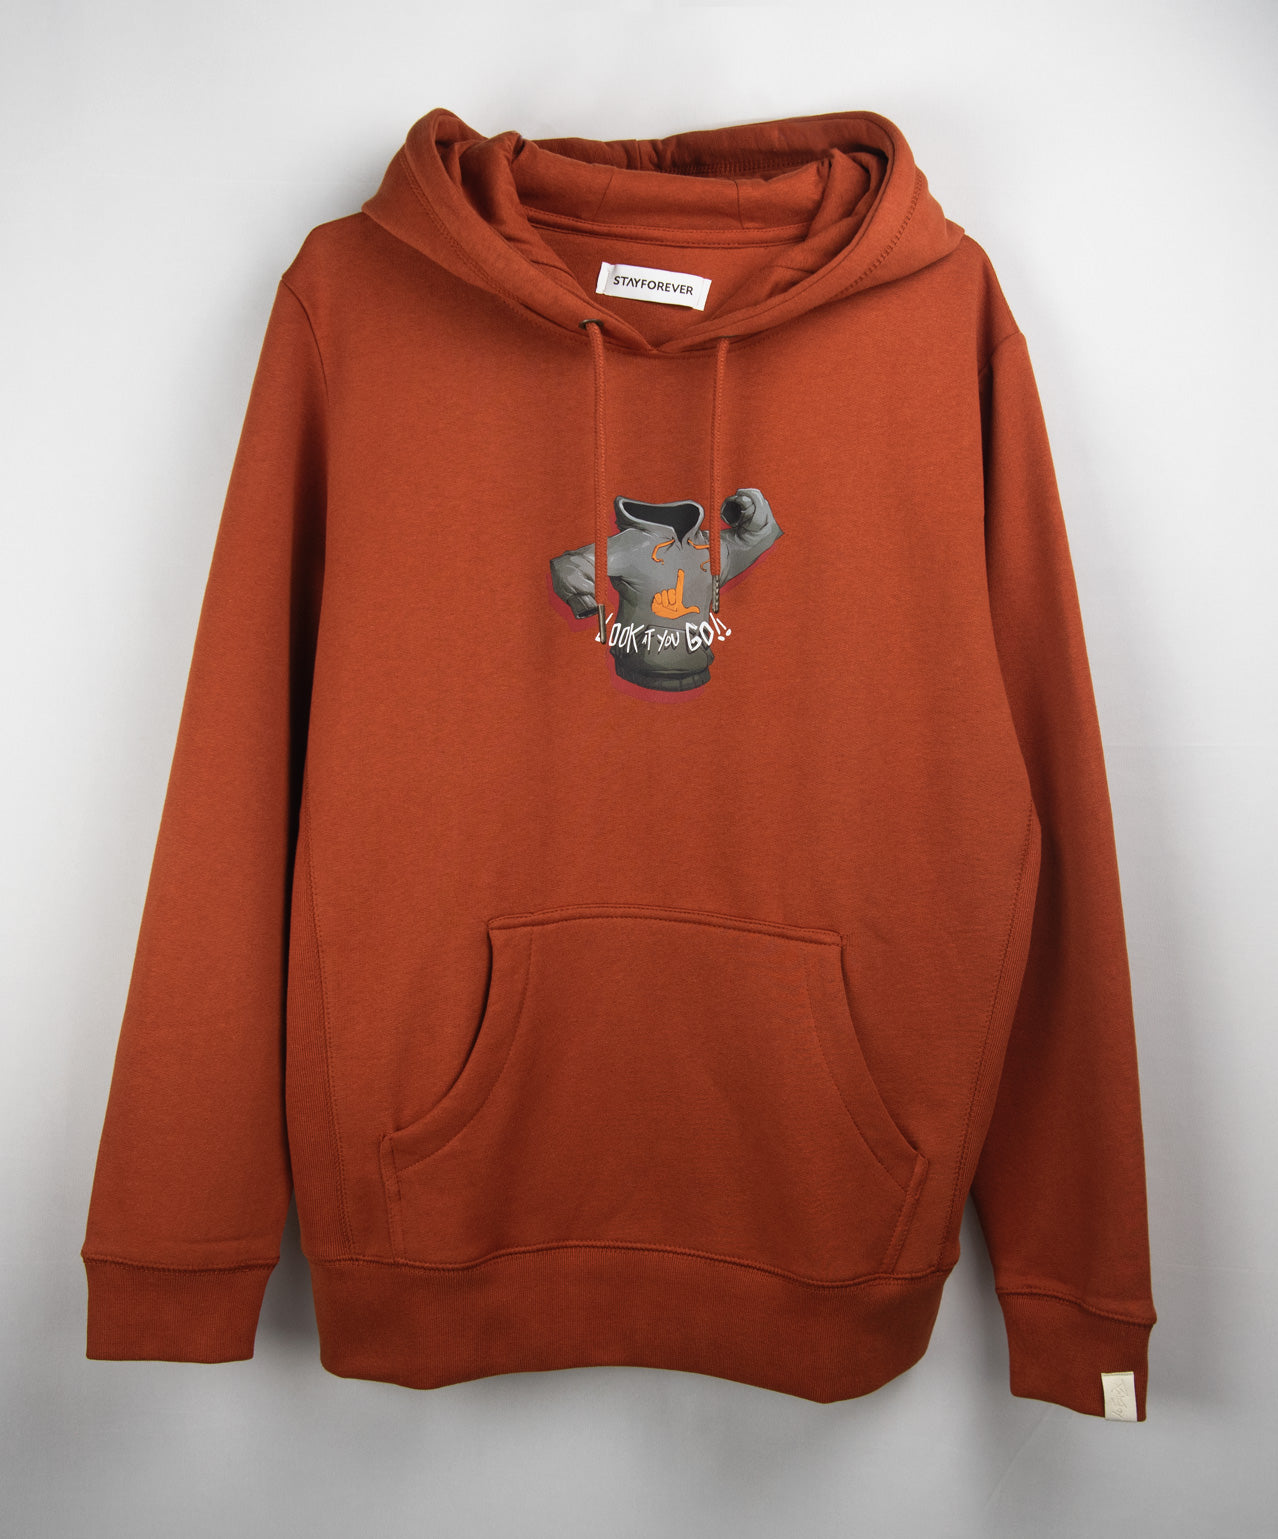 LOOK AT YOU GO! ICON HOODIE